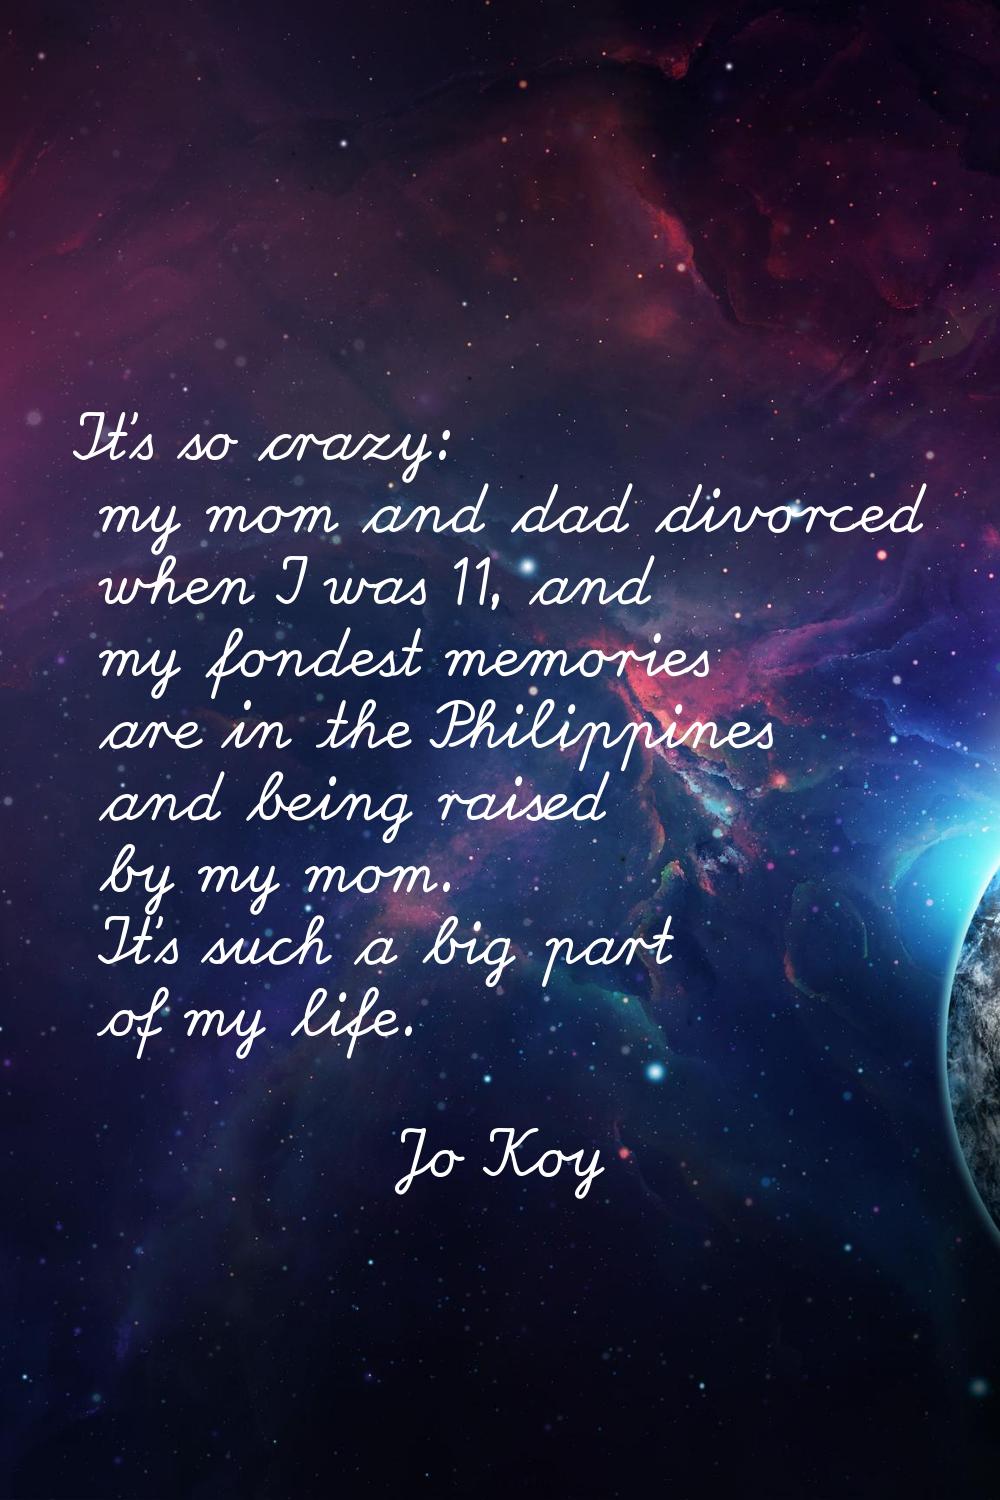 It's so crazy: my mom and dad divorced when I was 11, and my fondest memories are in the Philippine